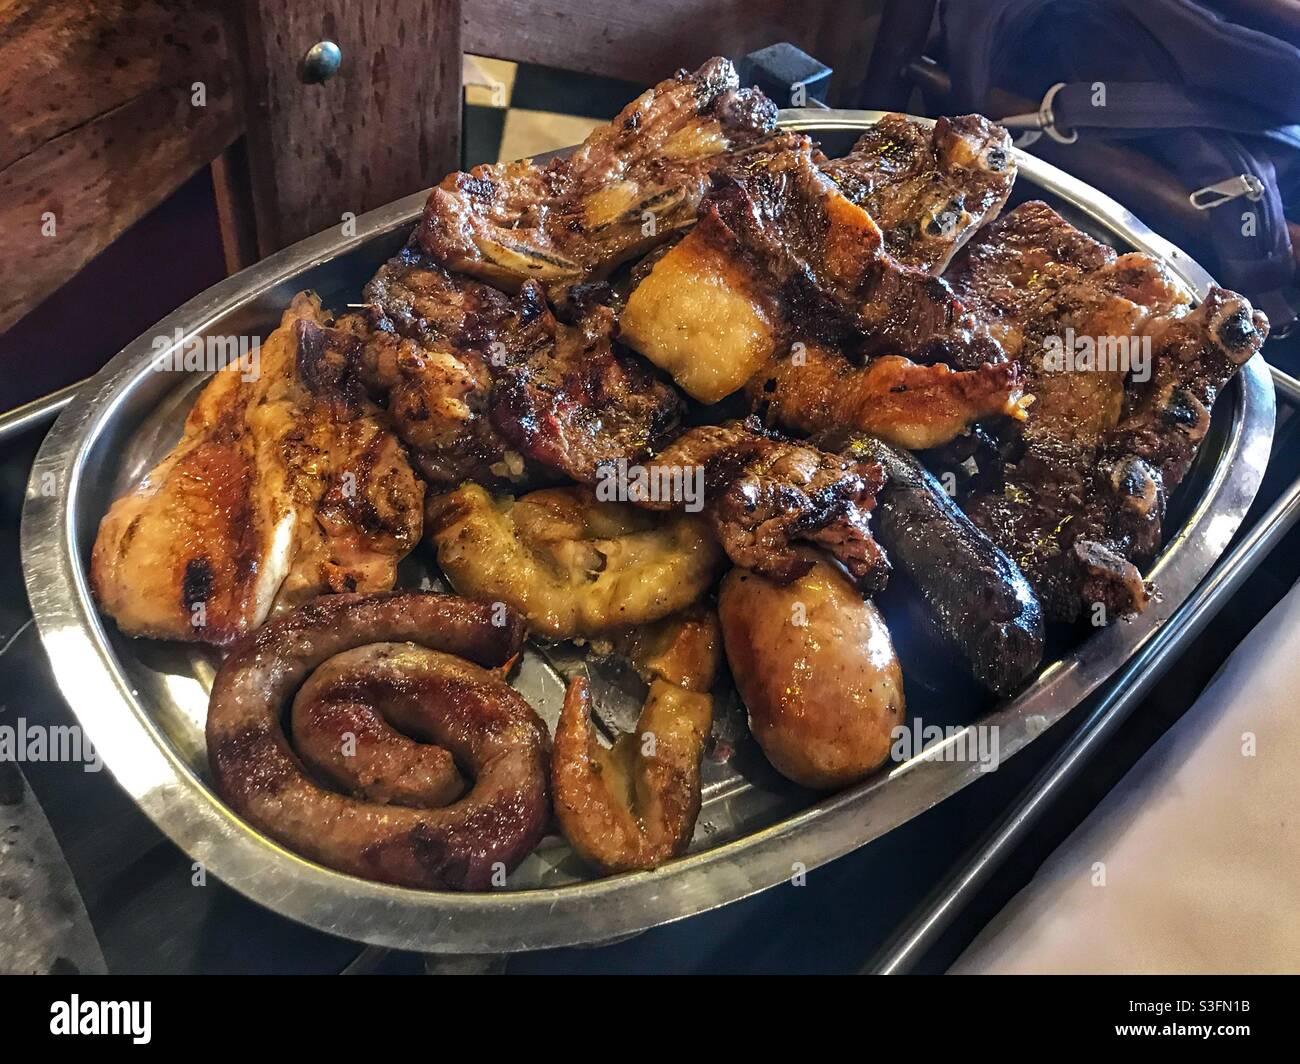 A parrillada or mixed grill including several different types of meat in Salta, Argentina Stock Photo